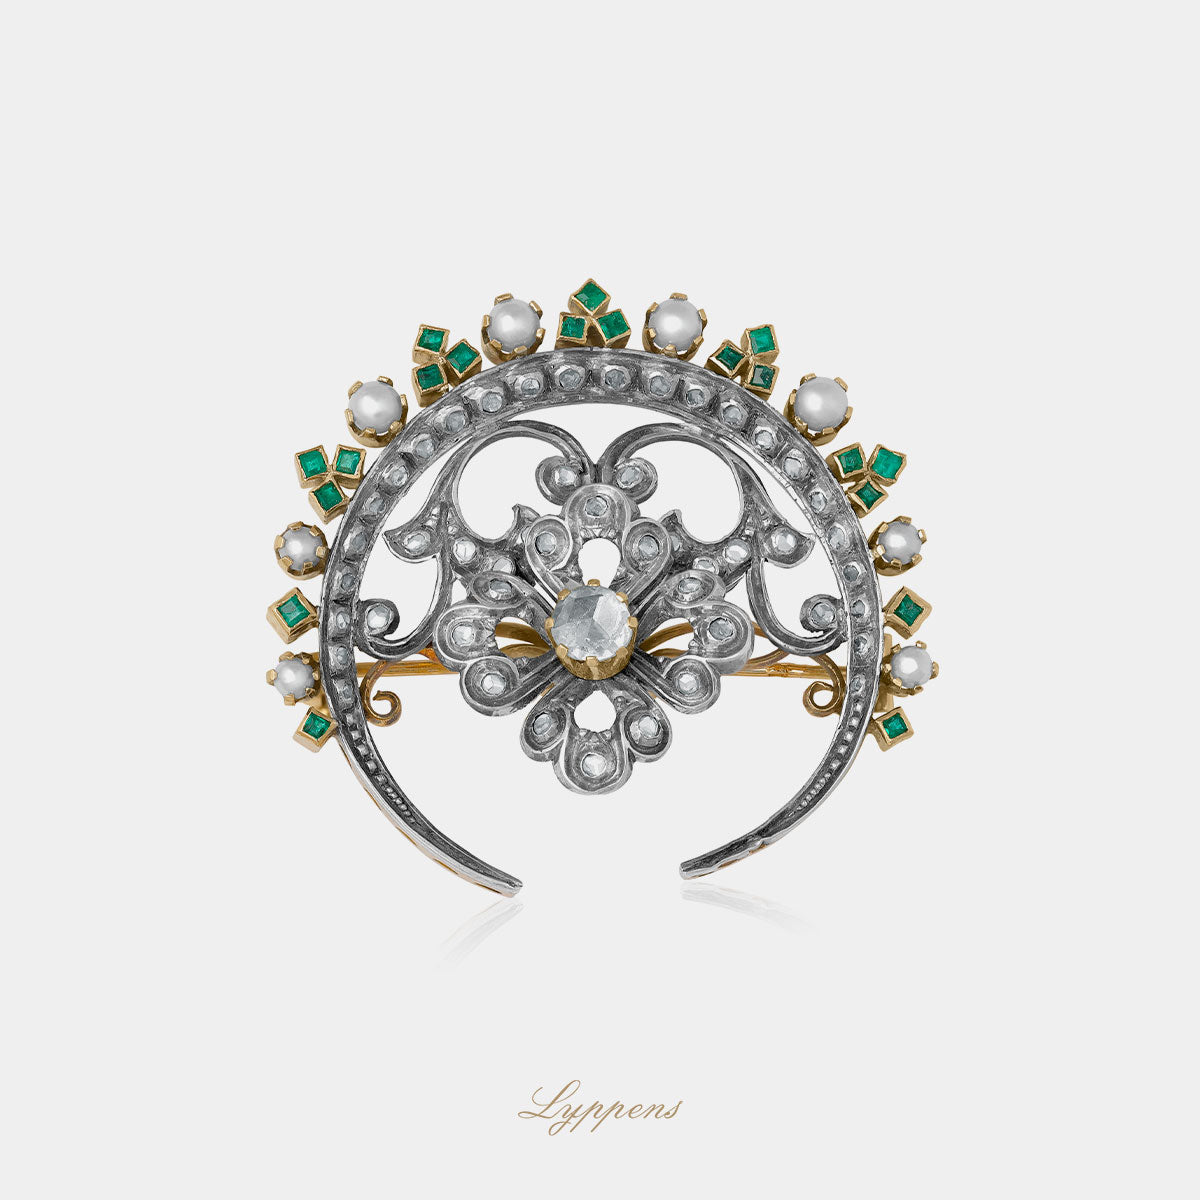 Yellow gold and silver vintage brooch with emerald, diamond and pearls